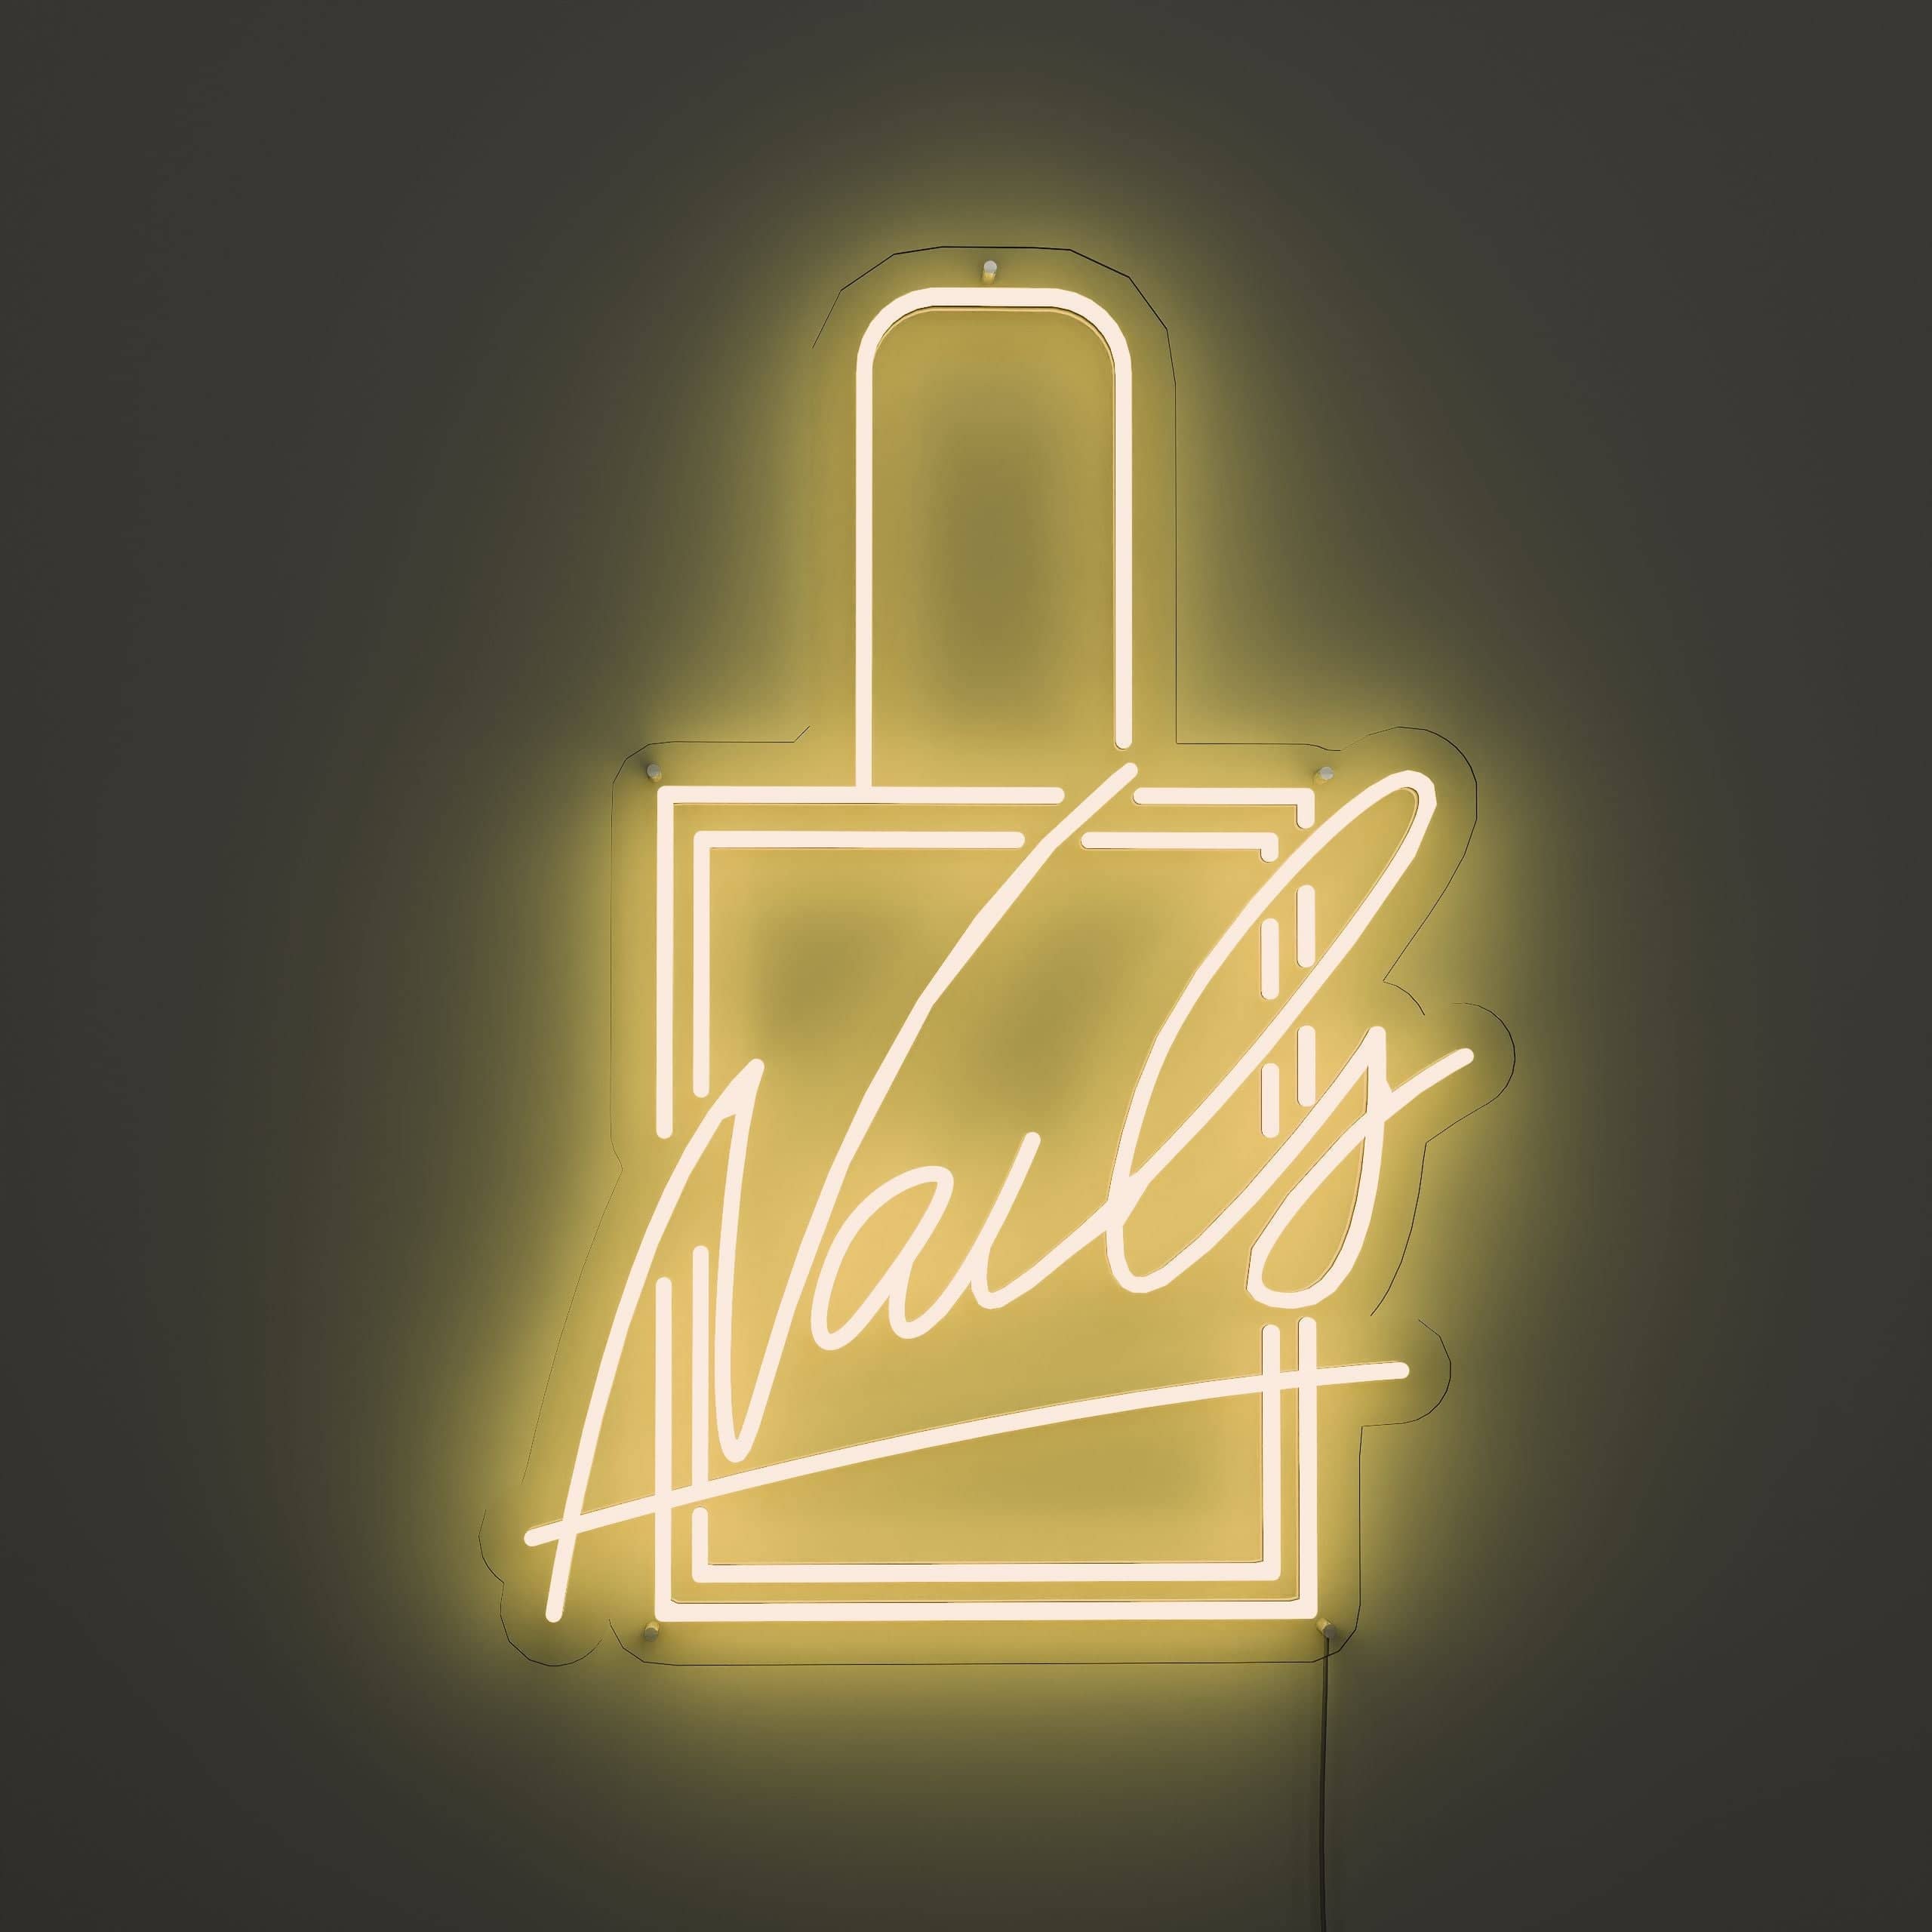 edgy-nail-art-expressions-neon-sign-lite